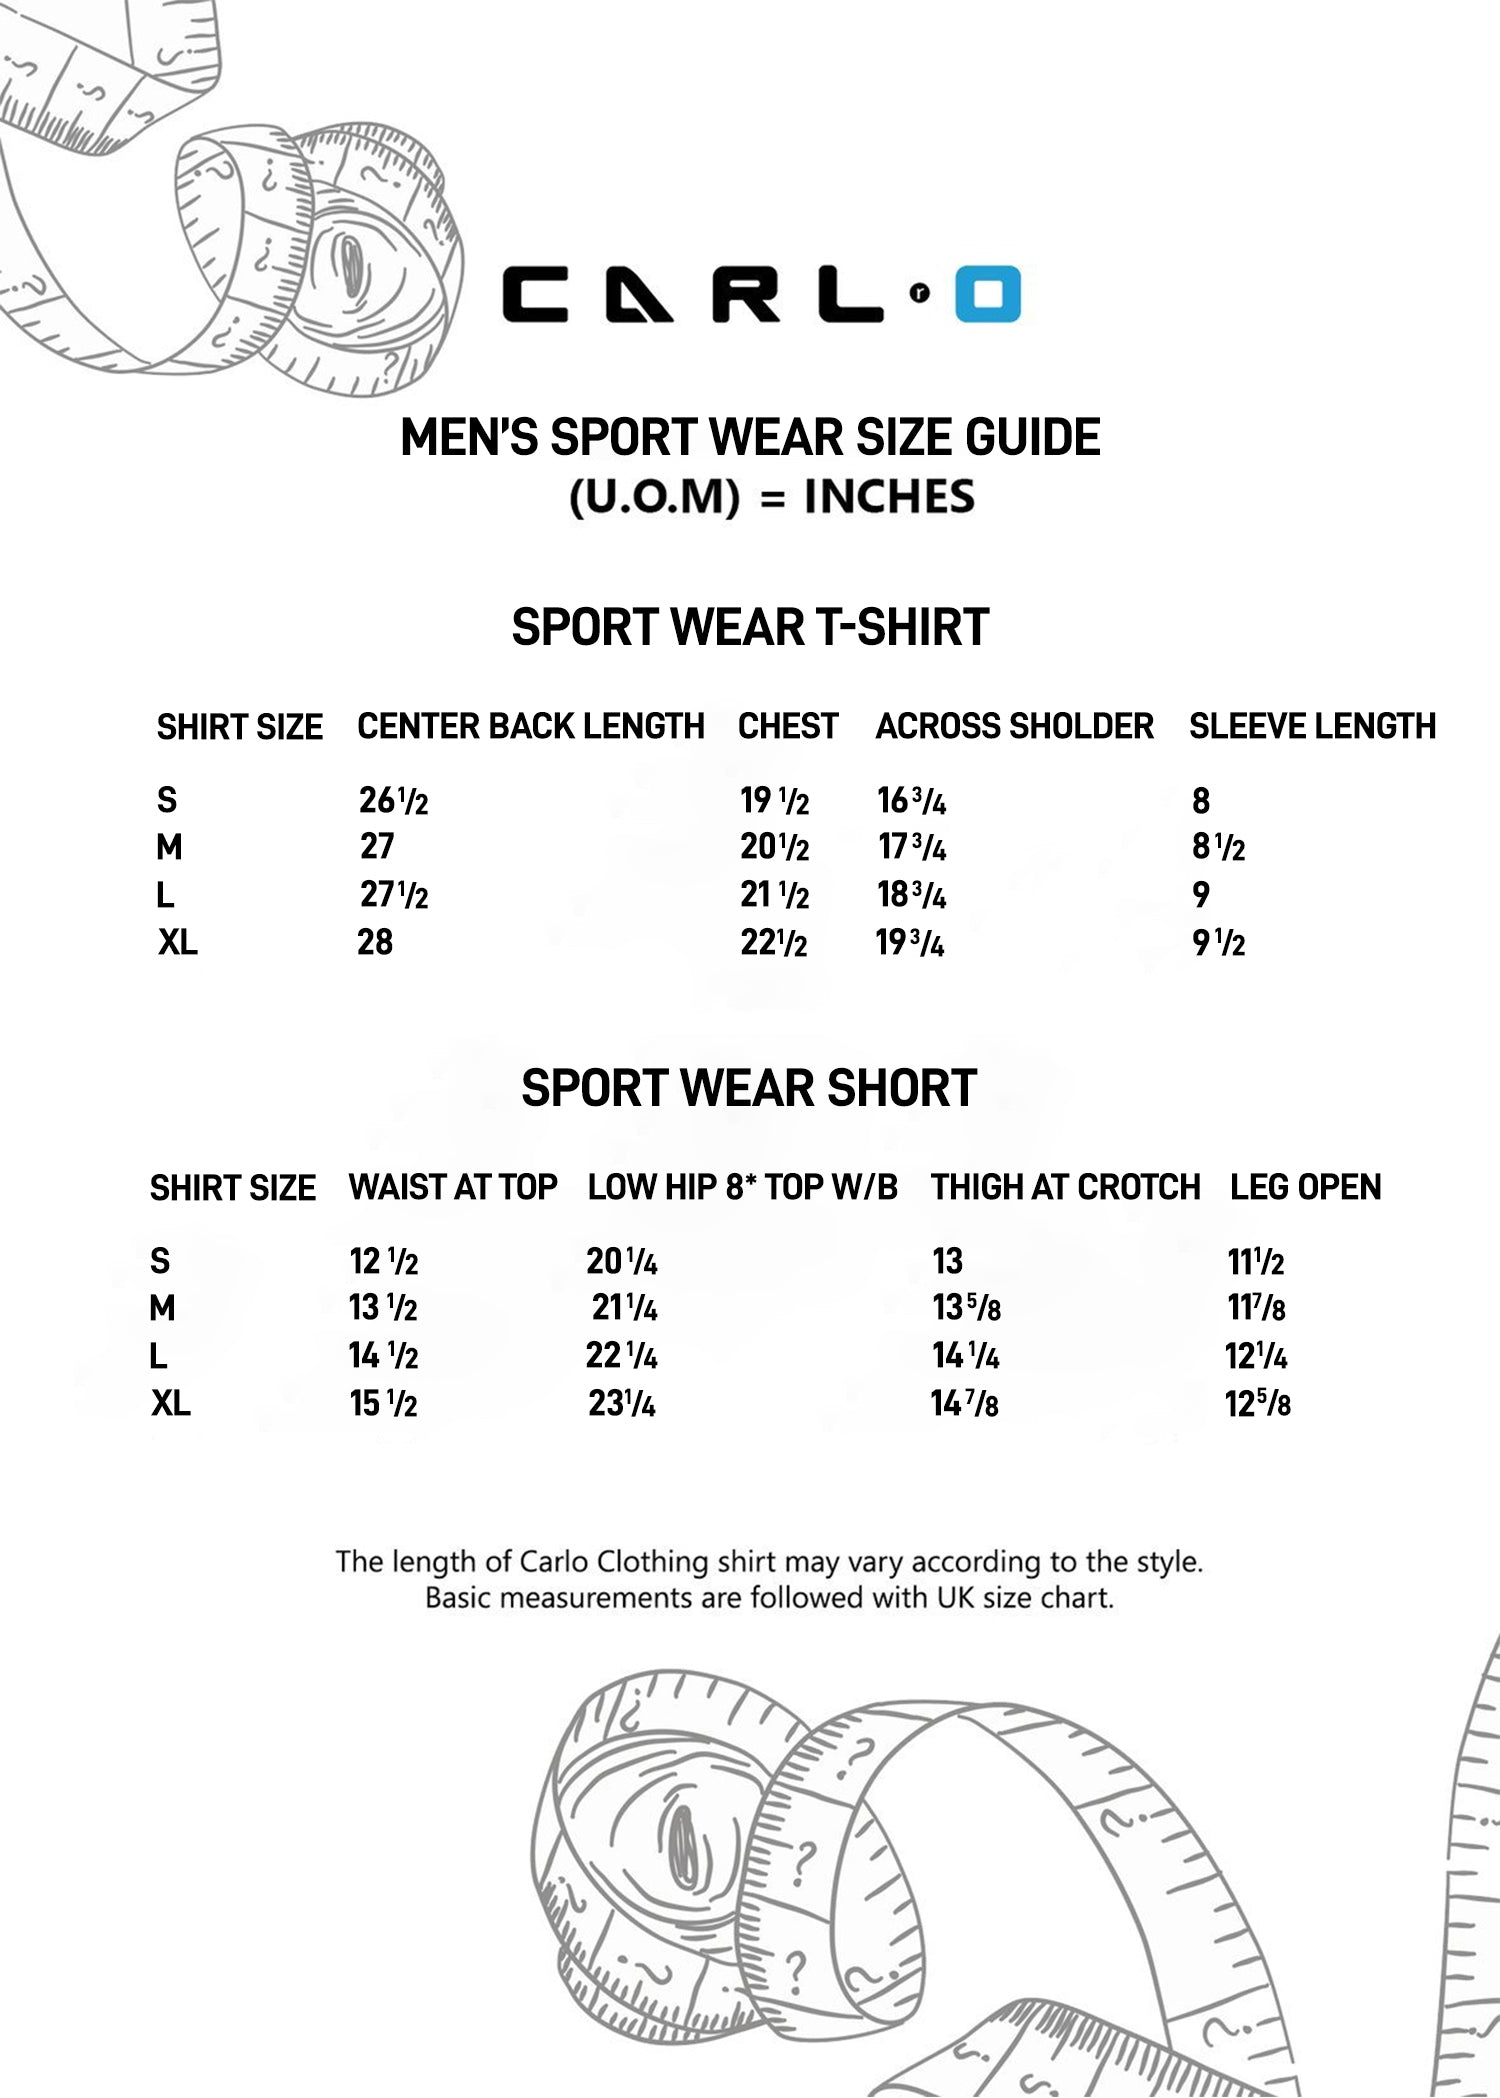 Active Wear T-shirt with Back Panel